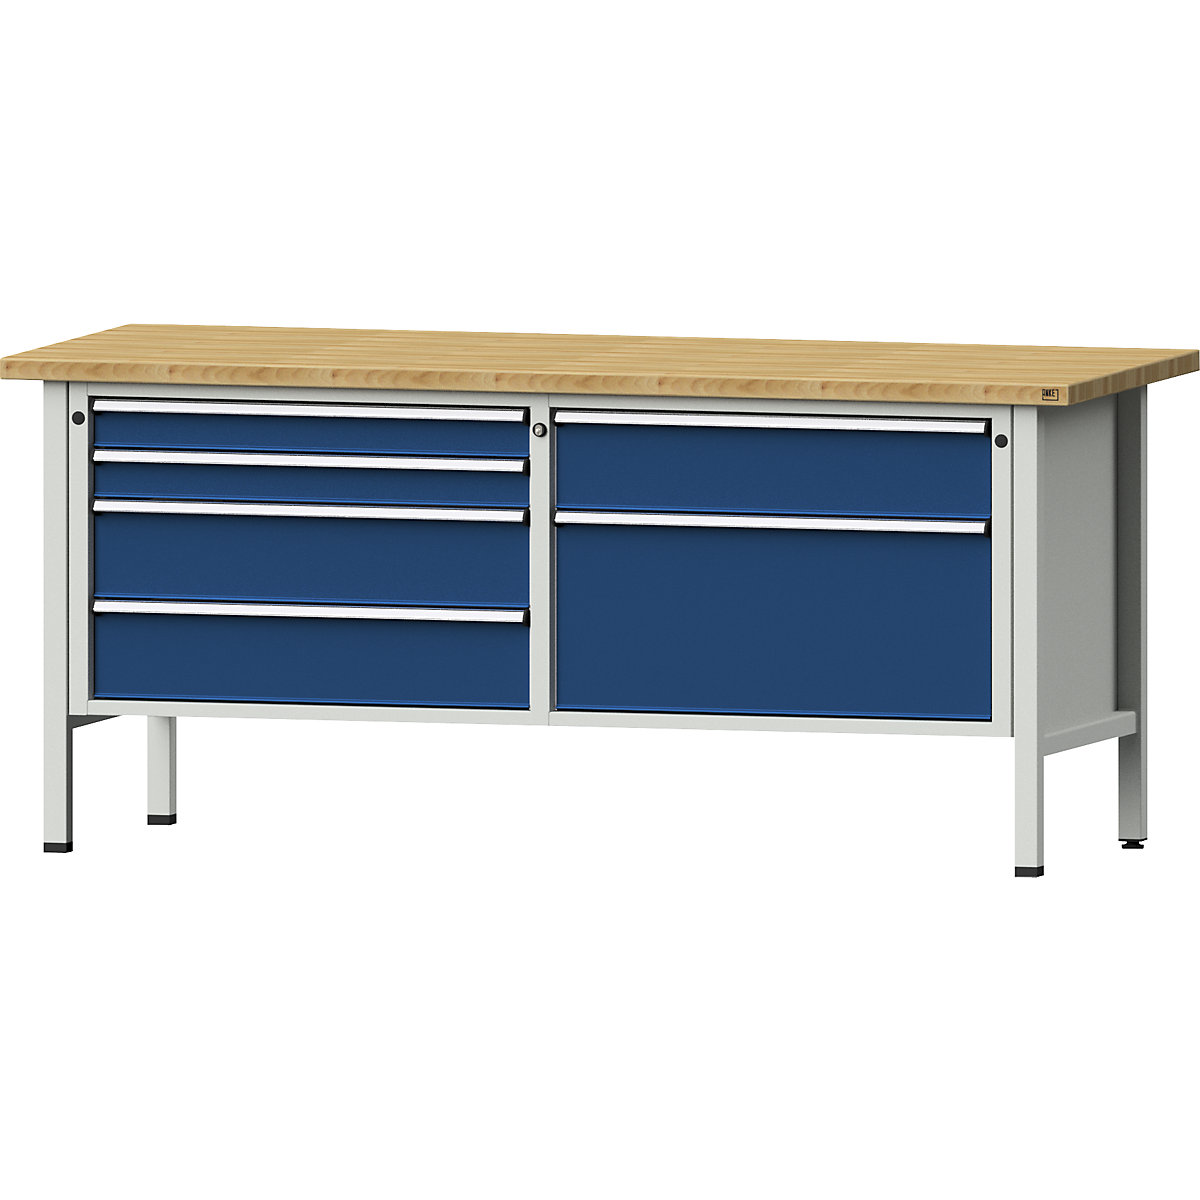 Workbenches 2000 mm wide, frame construction – ANKE